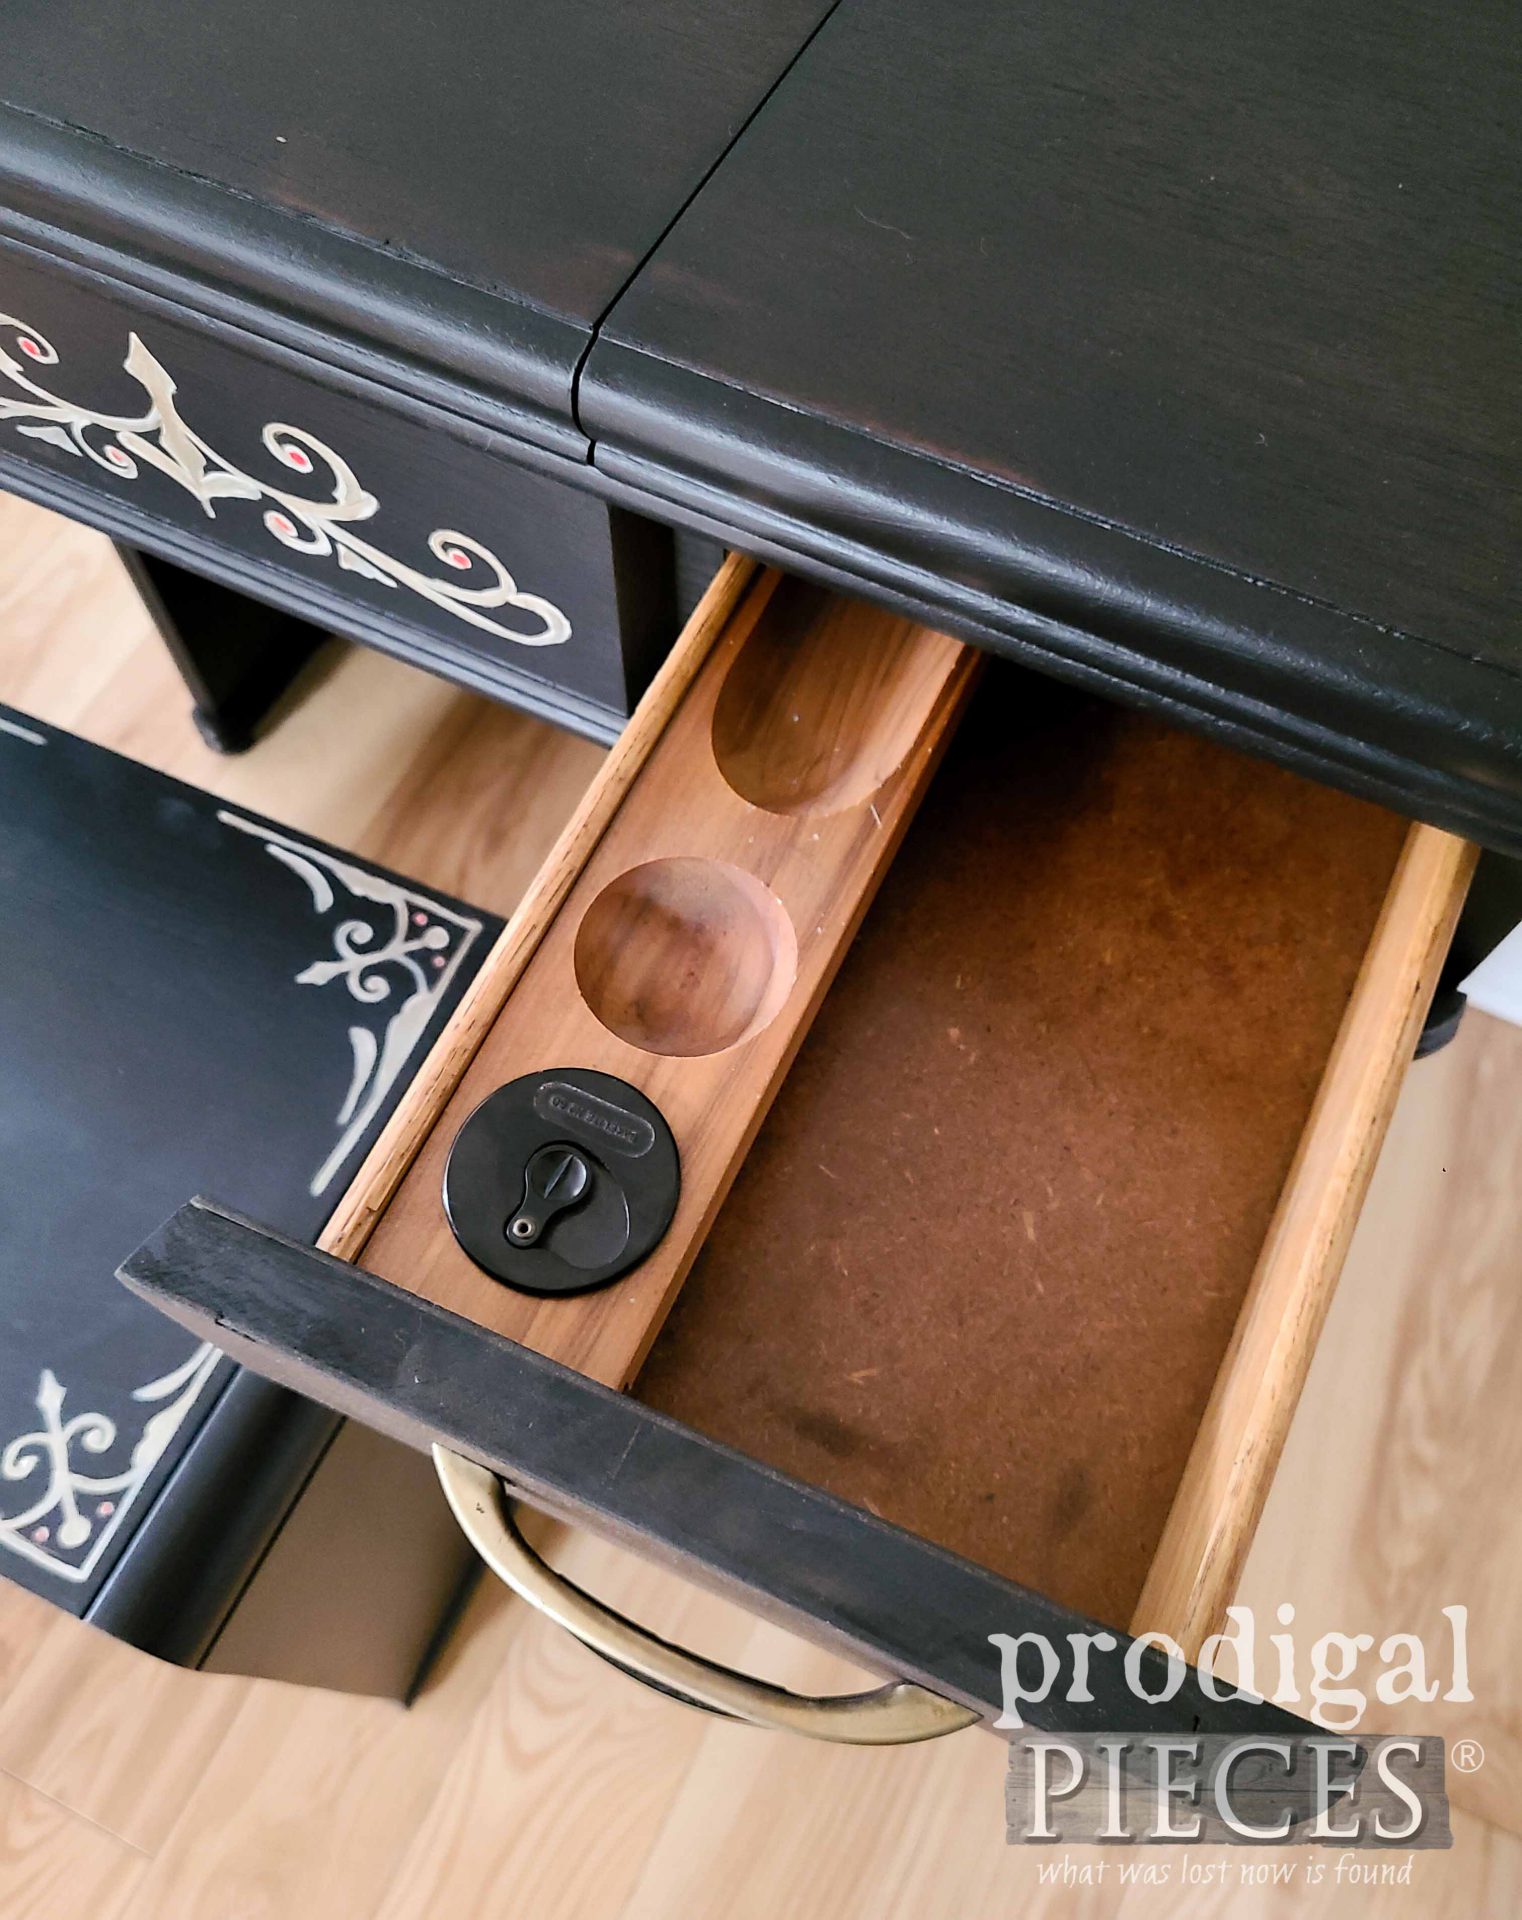 Antique Ink Well in Art Deco Sewing Desk by Larissa of Prodigal Pieces | prodigalpieces.com #prodigalpieces #artdeco #vintage #home #furniture